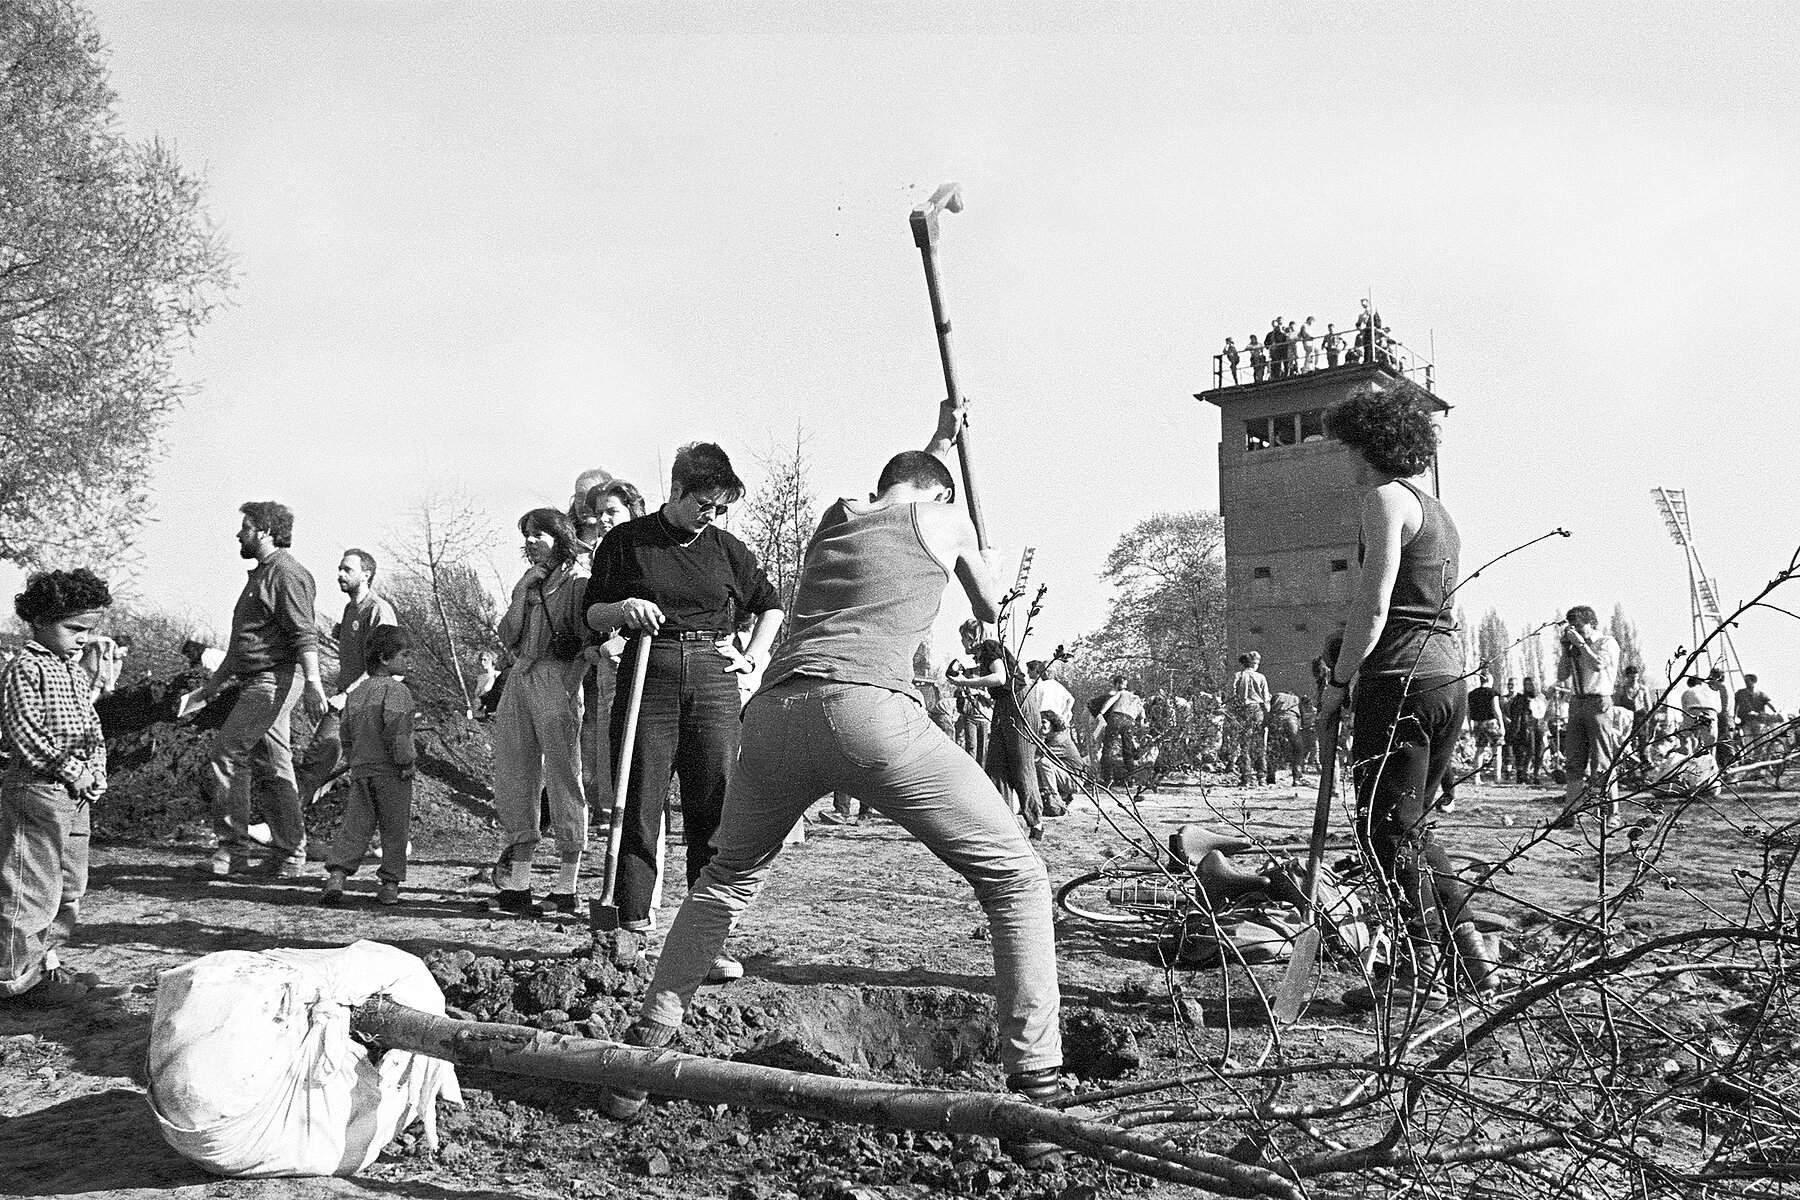 Workers plant trees for the newly developed Mauerpark. In the background, onlookers are standing on a former watchtower.